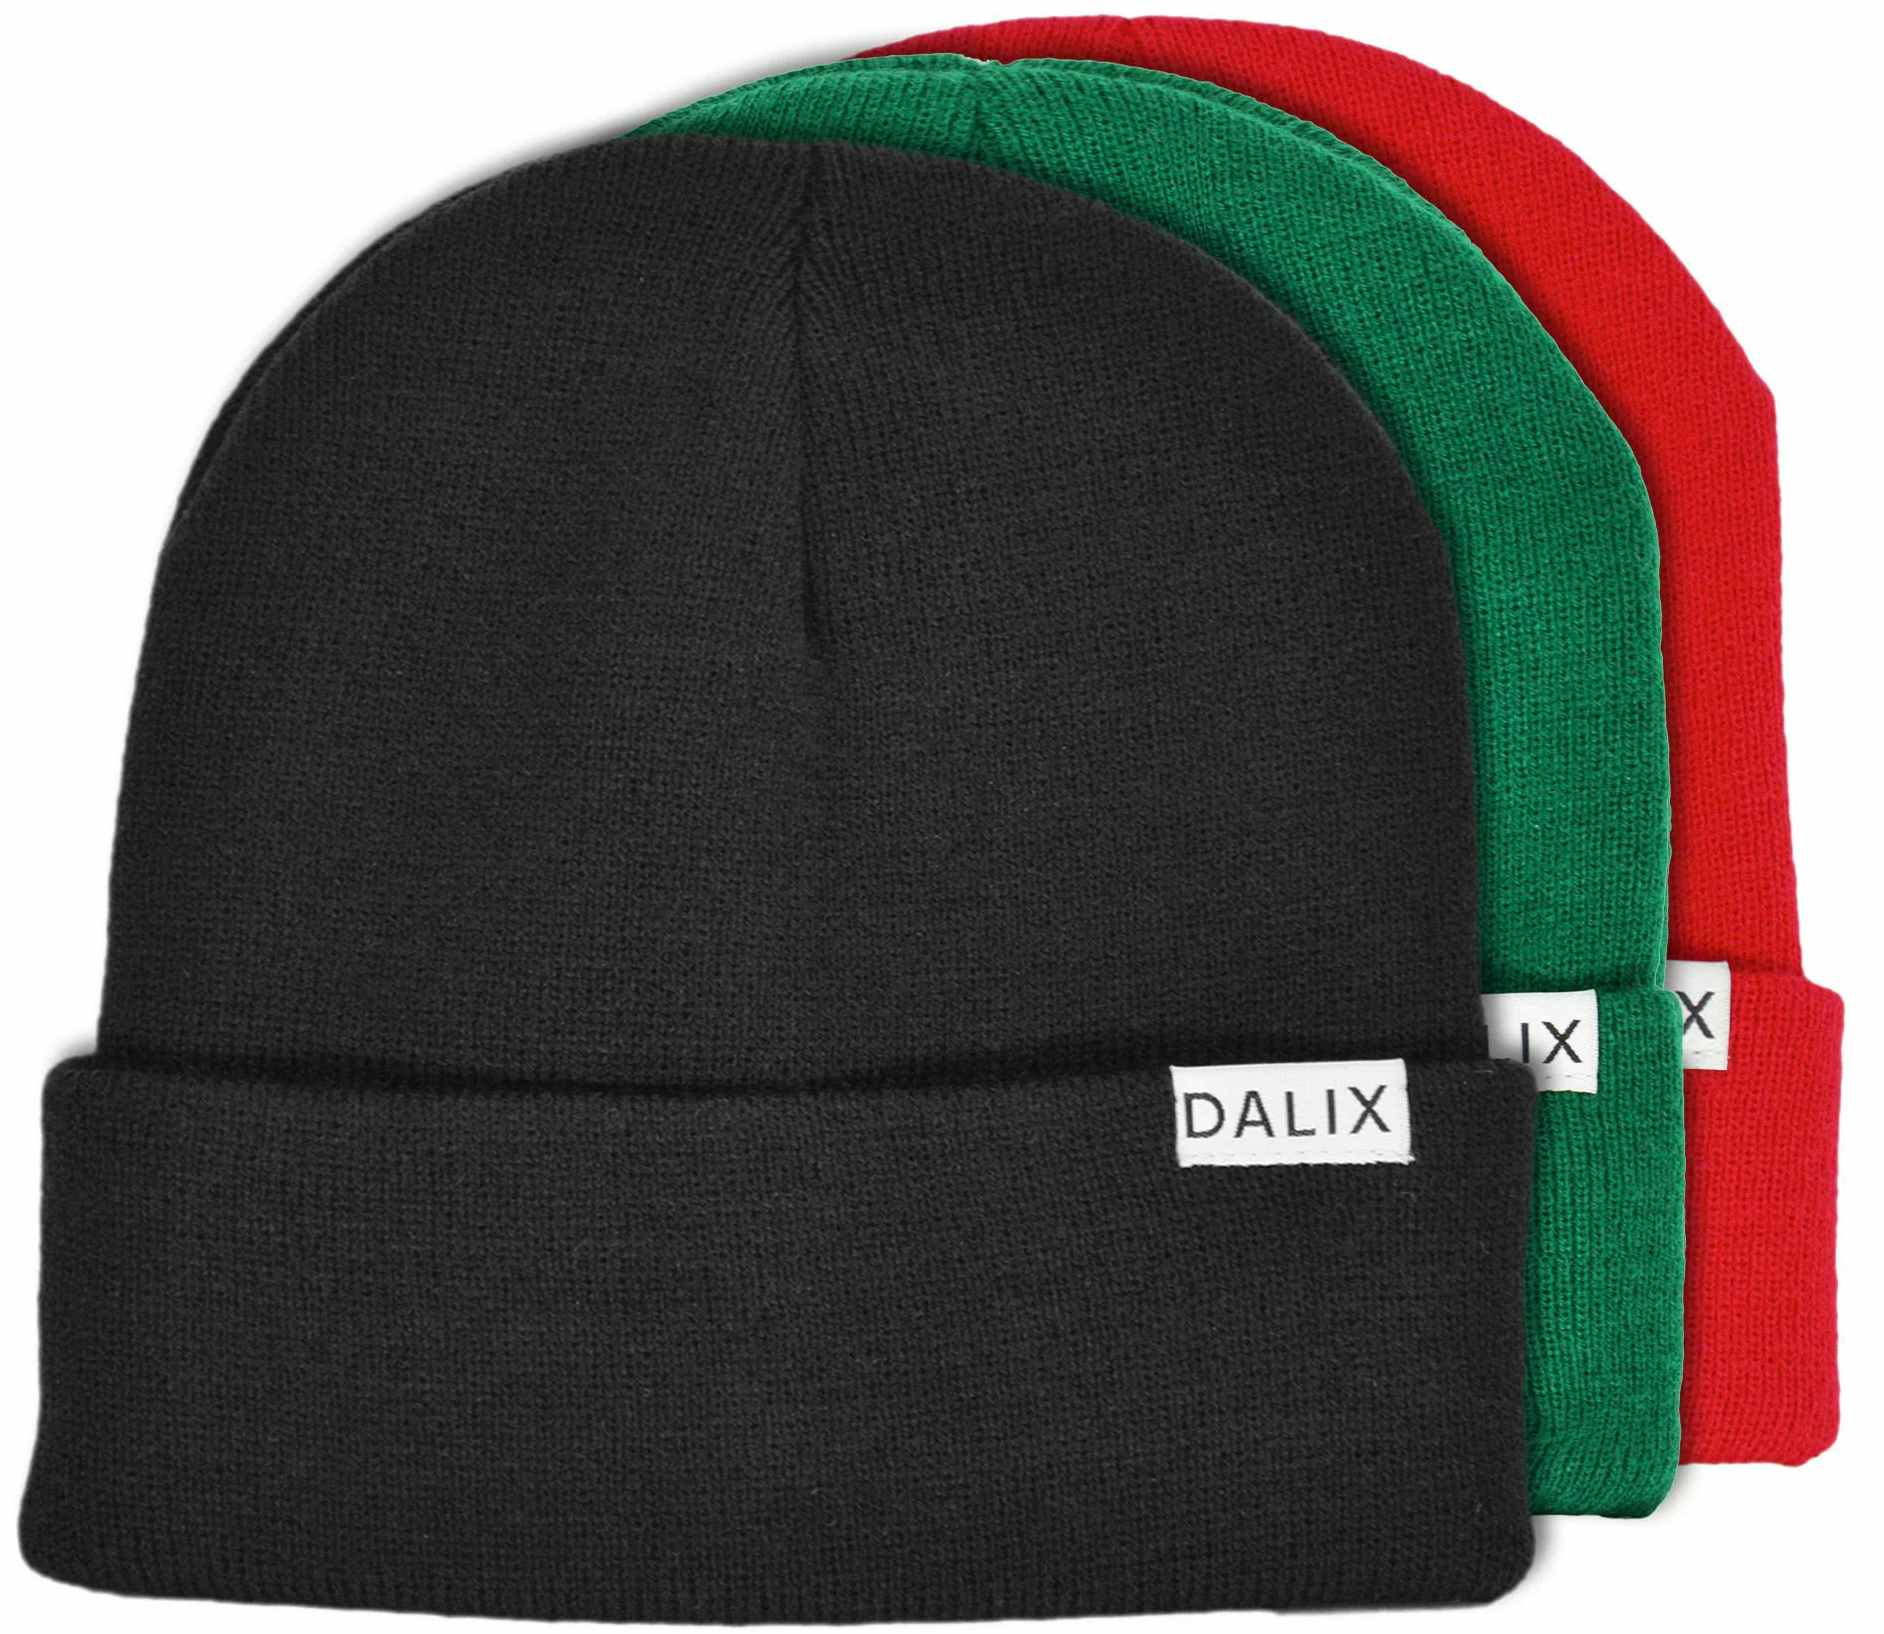 three different colored beanie hats on a white background